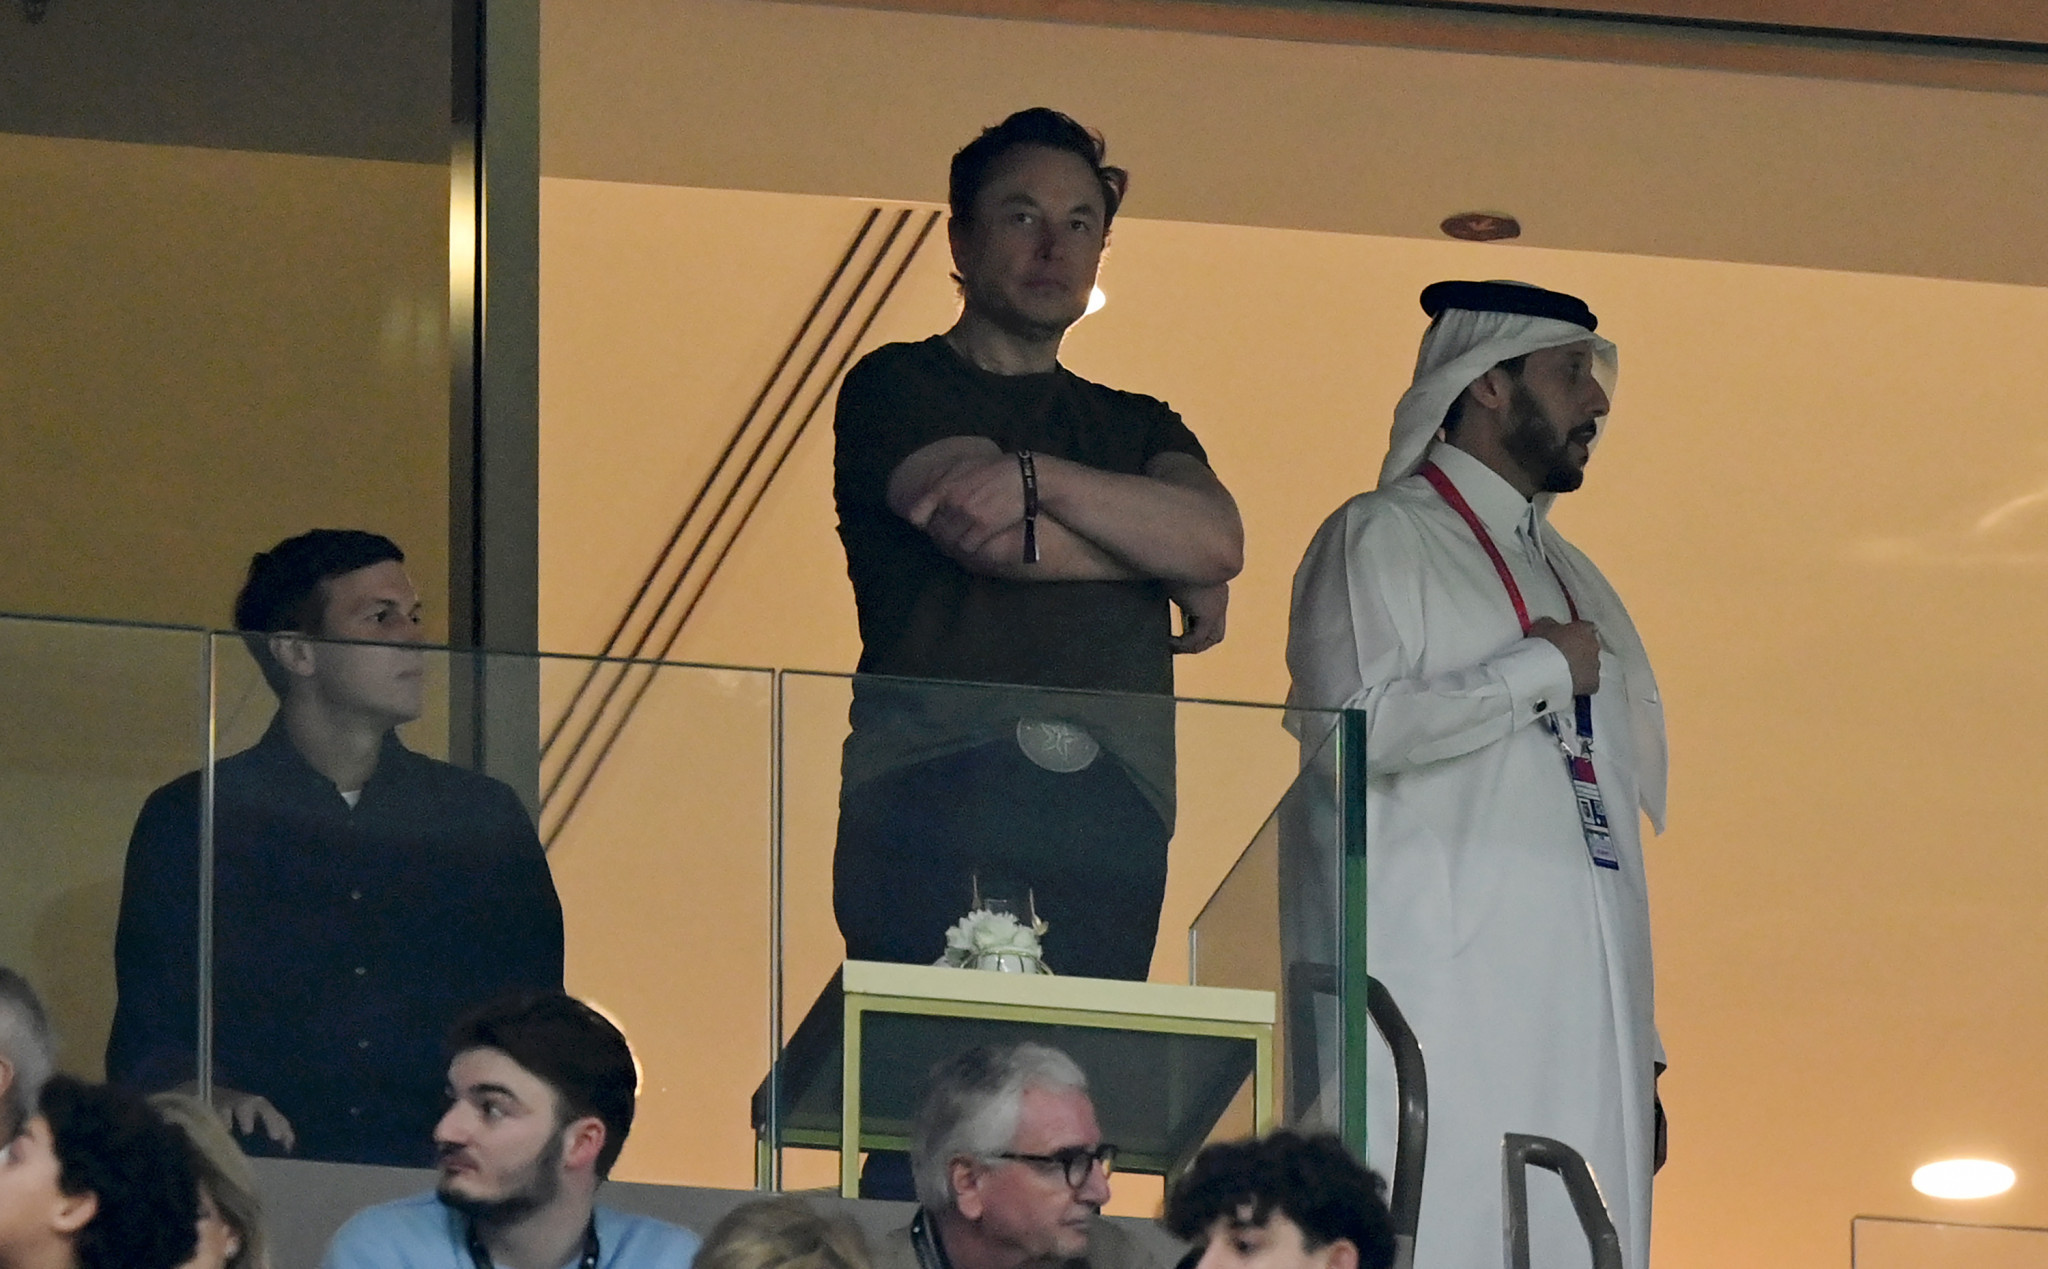 Elon Musk was one of the guests at the FIFA World Cup final ©Getty Images